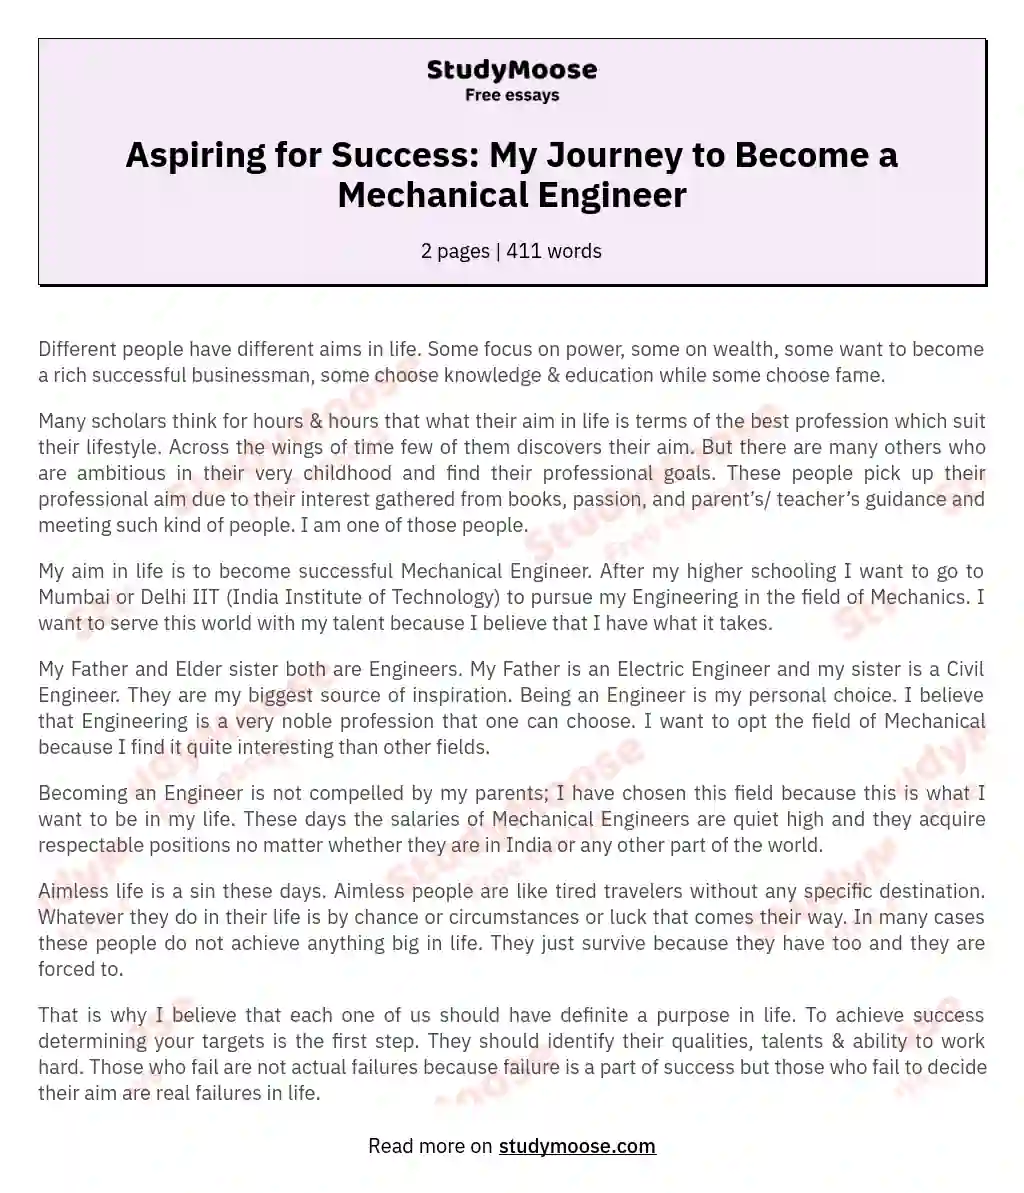 Aspiring for Success: My Journey to Become a Mechanical Engineer essay